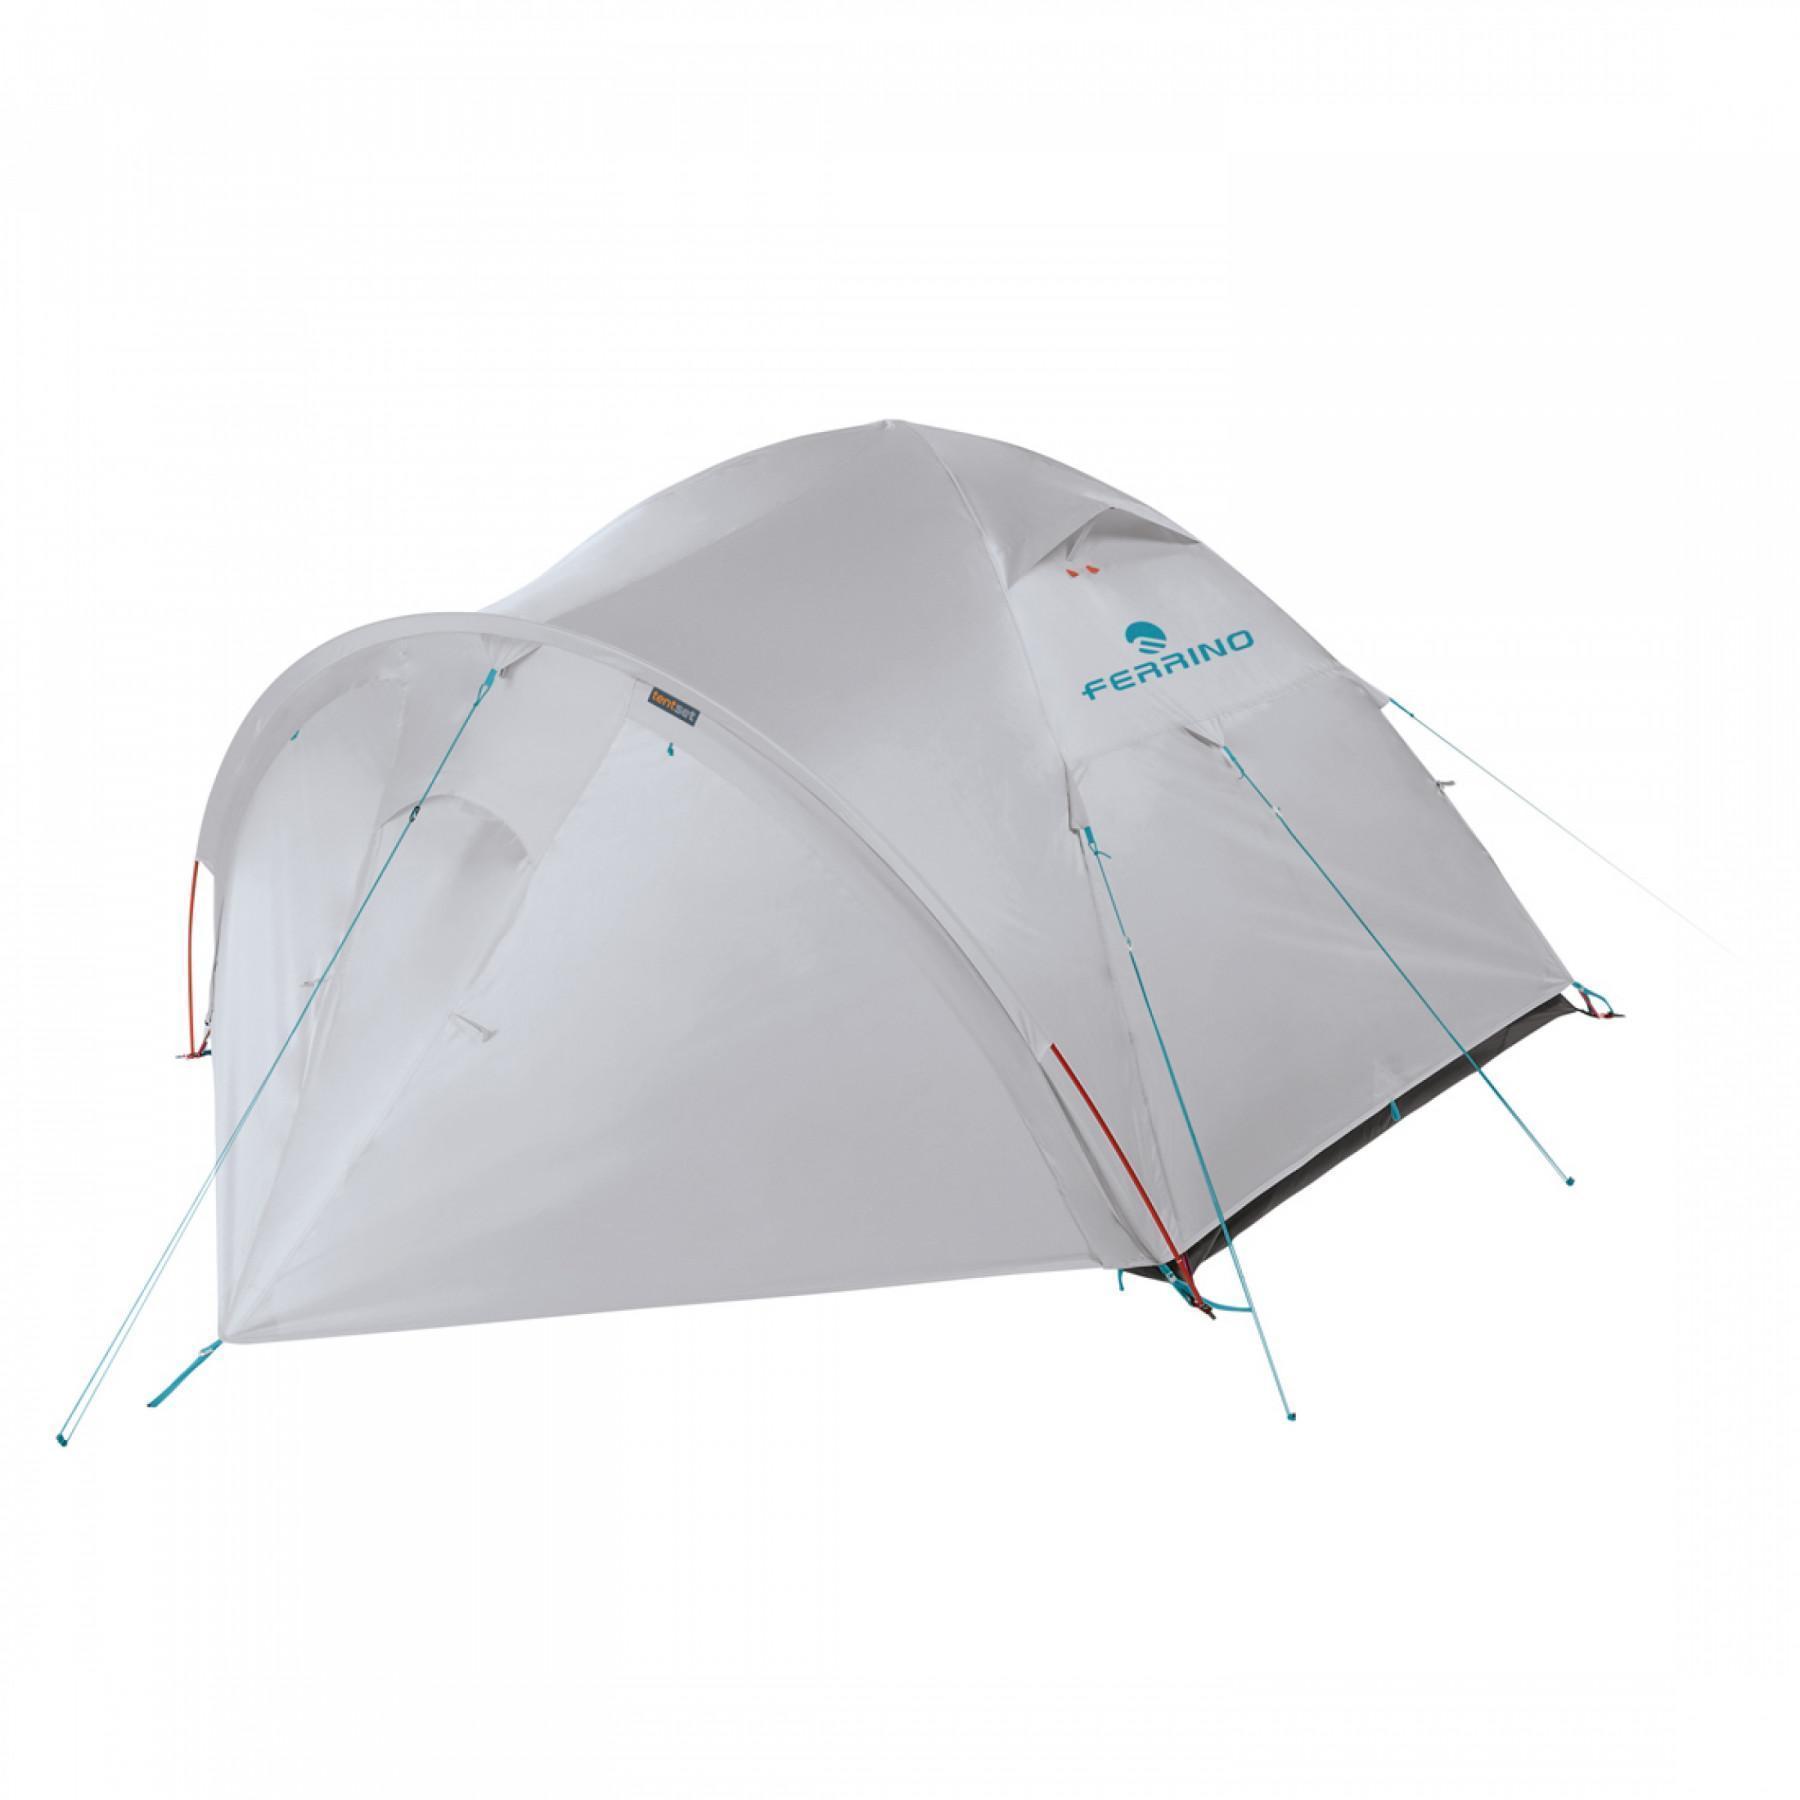 Tent Ferrino X3 fly approach apsis